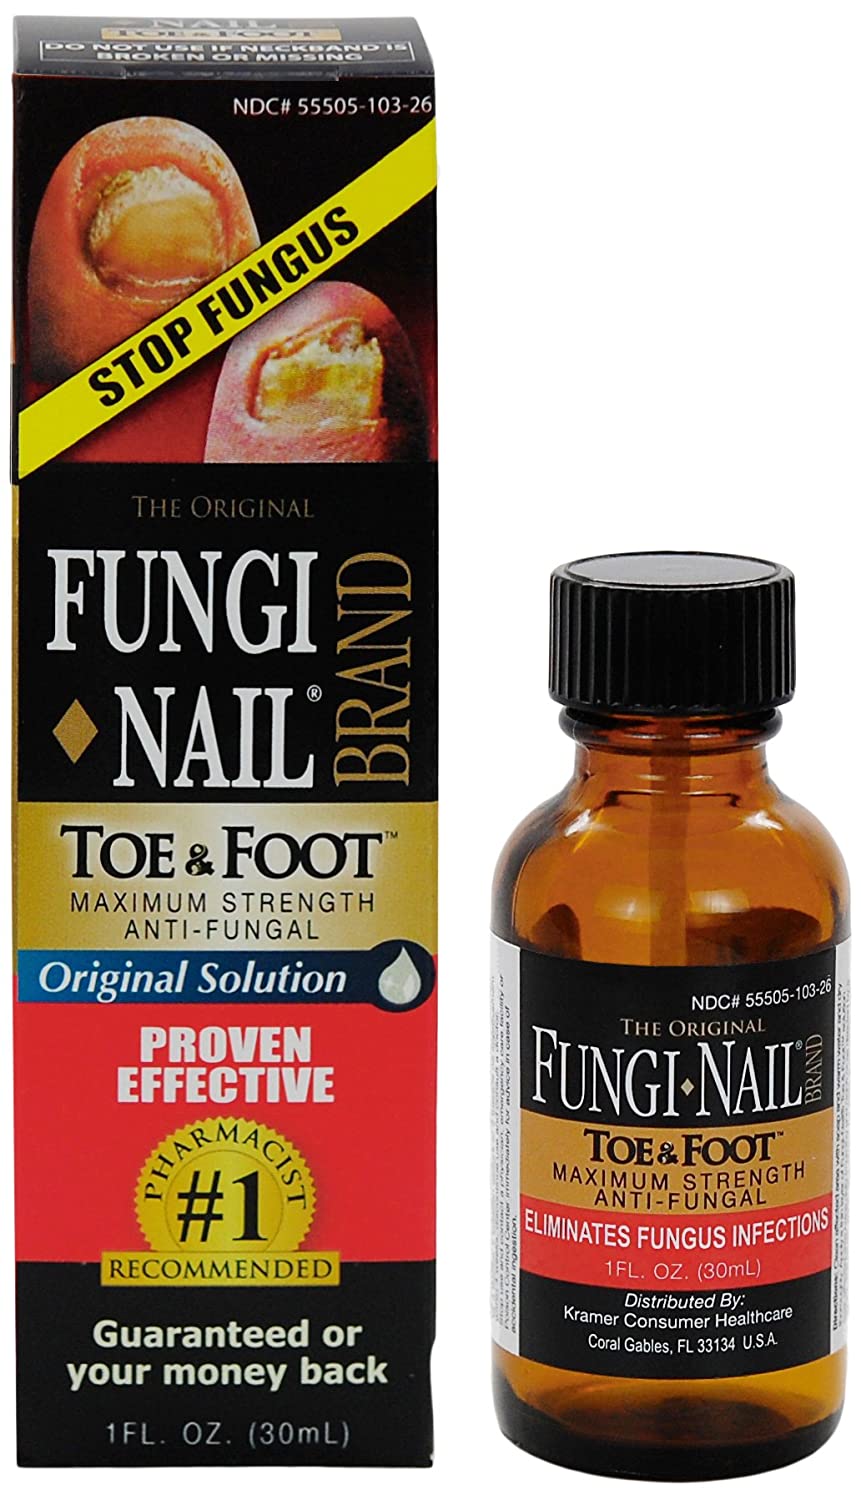 Is Your Nail Fungus Treatment Effective?